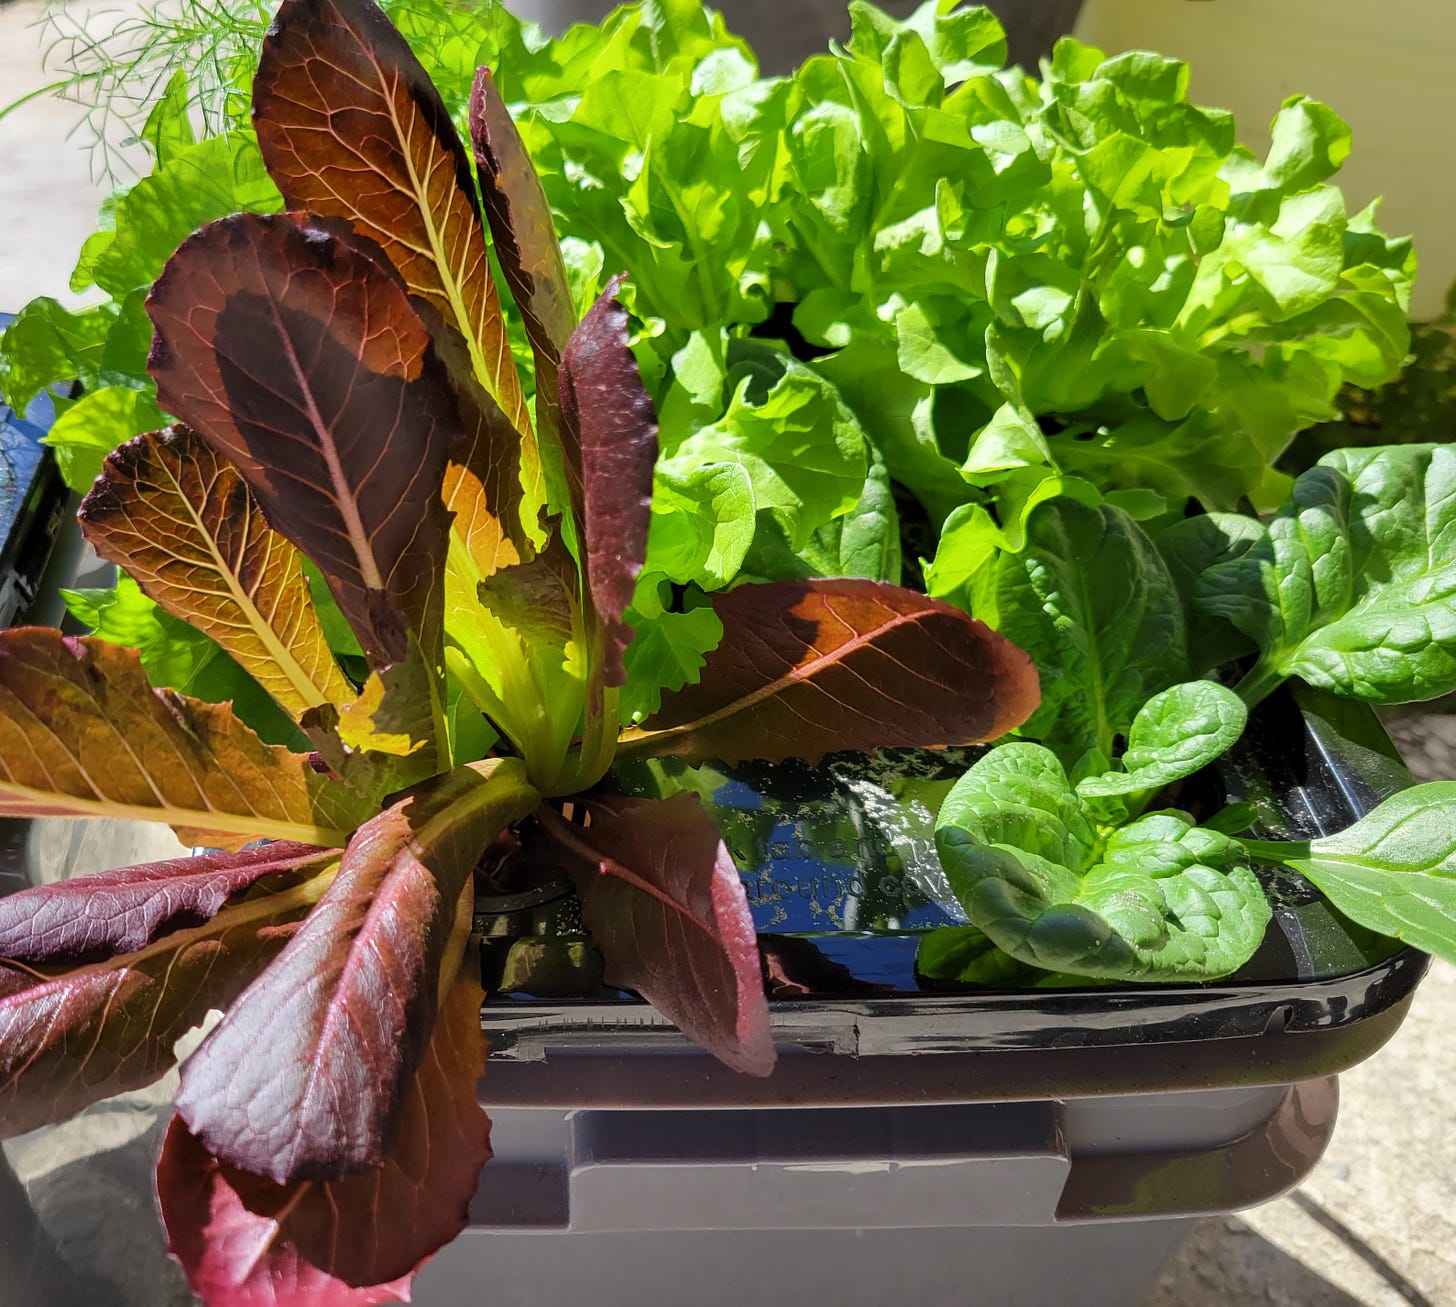 Several varieties of lettuce growing in a hydroponic system.